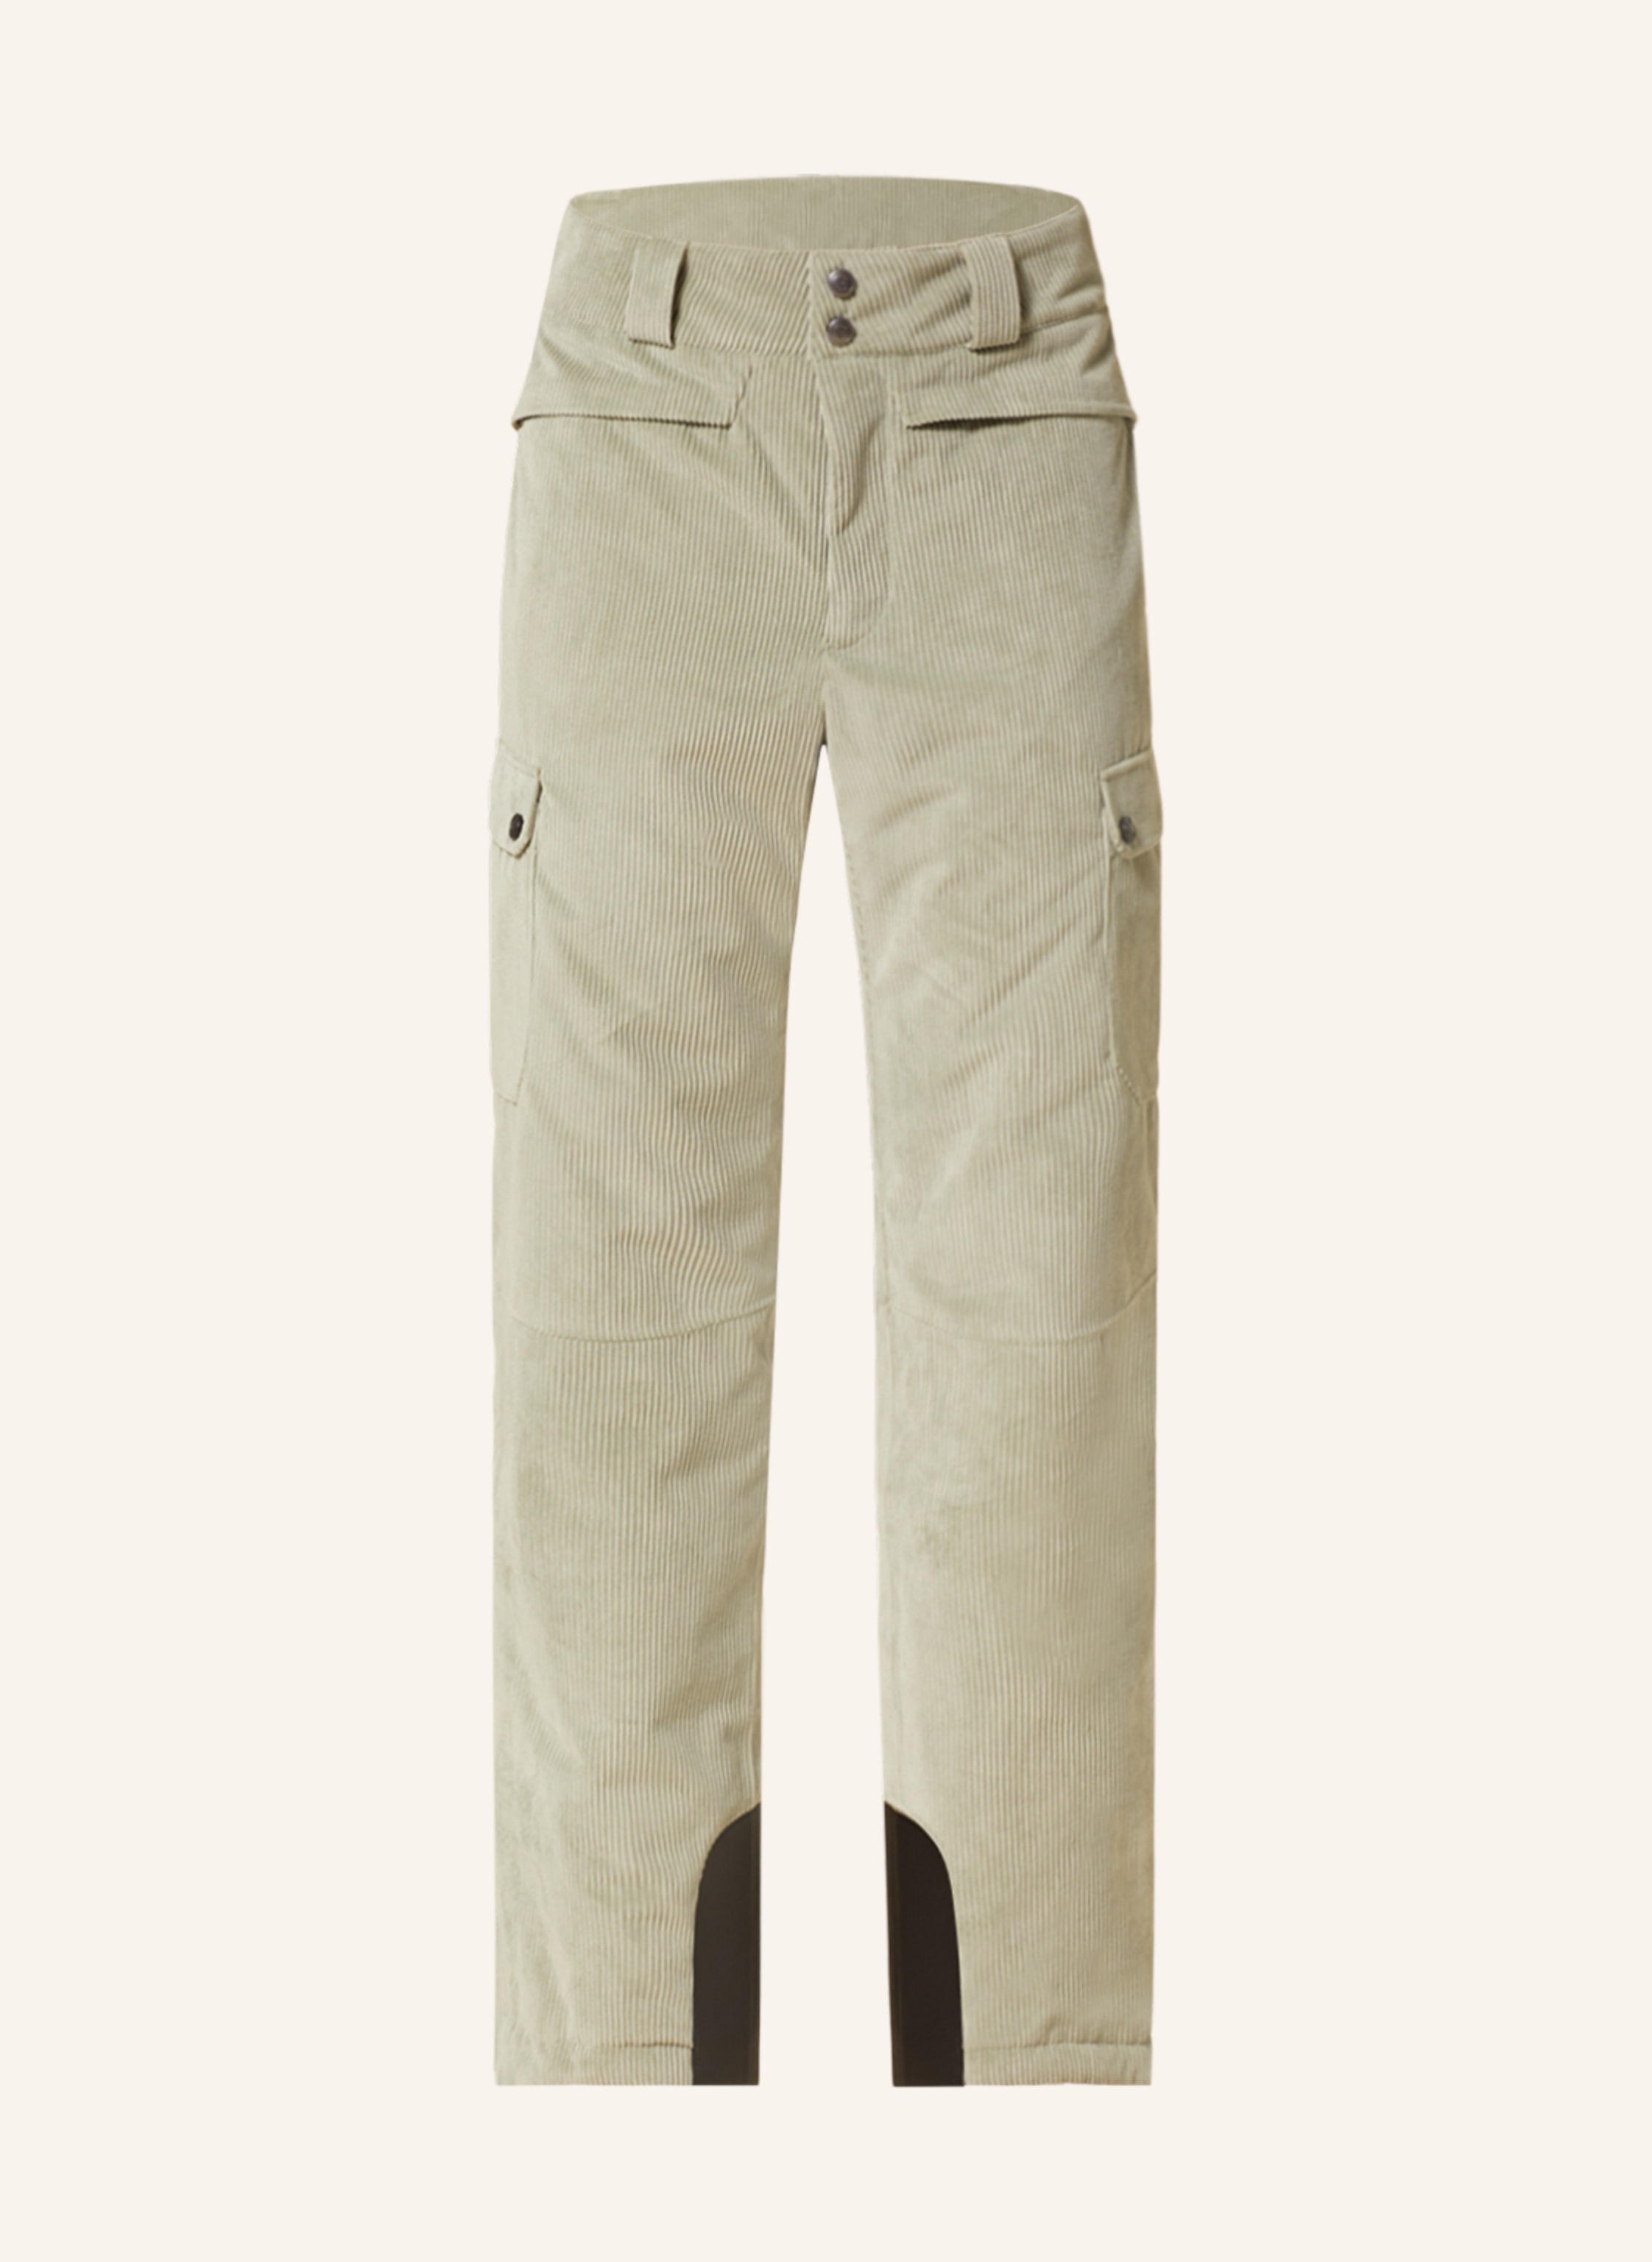 Unlined ski pants with side zips